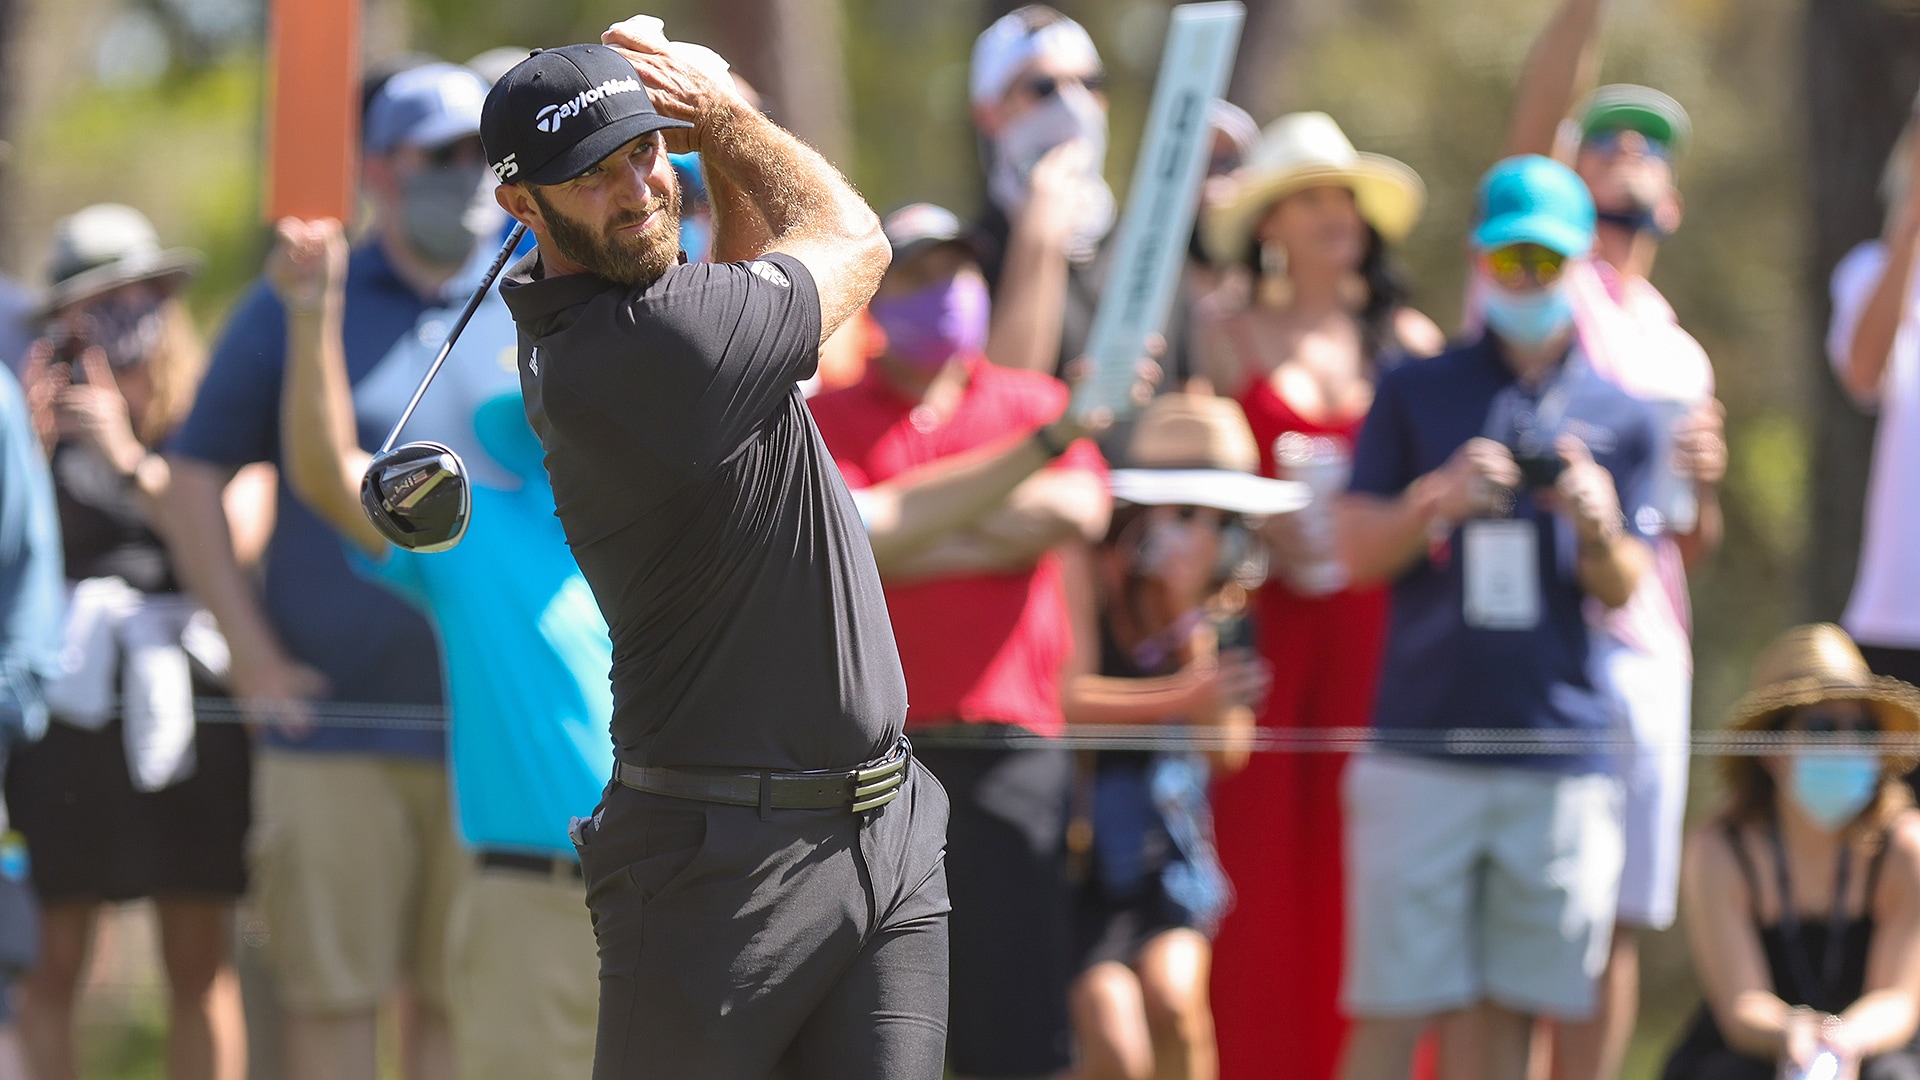 World No. 1 Dustin Johnson confirms he’s not going to compete in 2021 Olympics